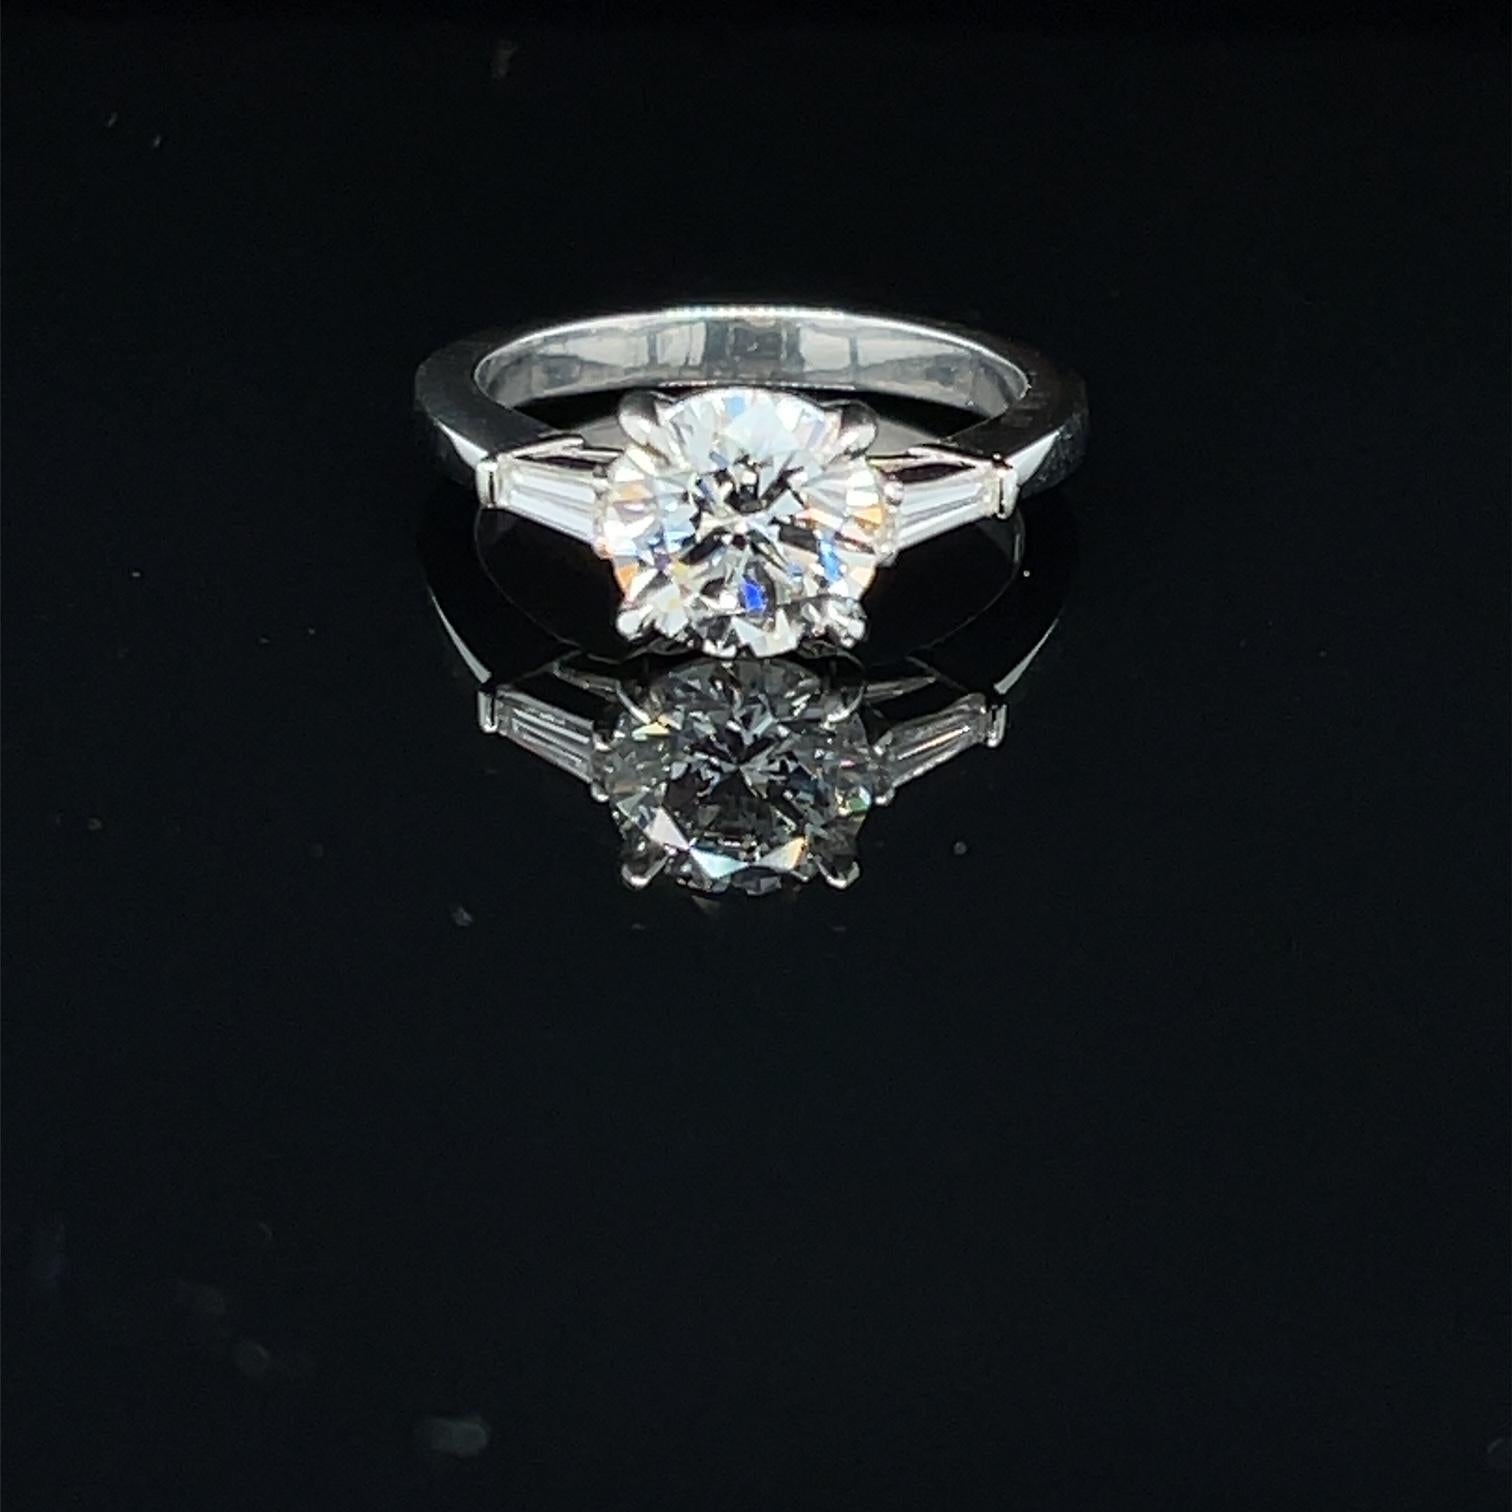 
DIAMOND AND PLATINUM ENGAGEMENT RING 1.72 CARATS
 
Round Diamond Center Stone 1.72 carats
 
J Color SI2 Clarity
 
With GIA Certificate # 2213161067
 
Tapered Baguette Diamonds 0.25 carat
 
Diamonds are H in Color and VS Clarity
 
Total Carat Weight